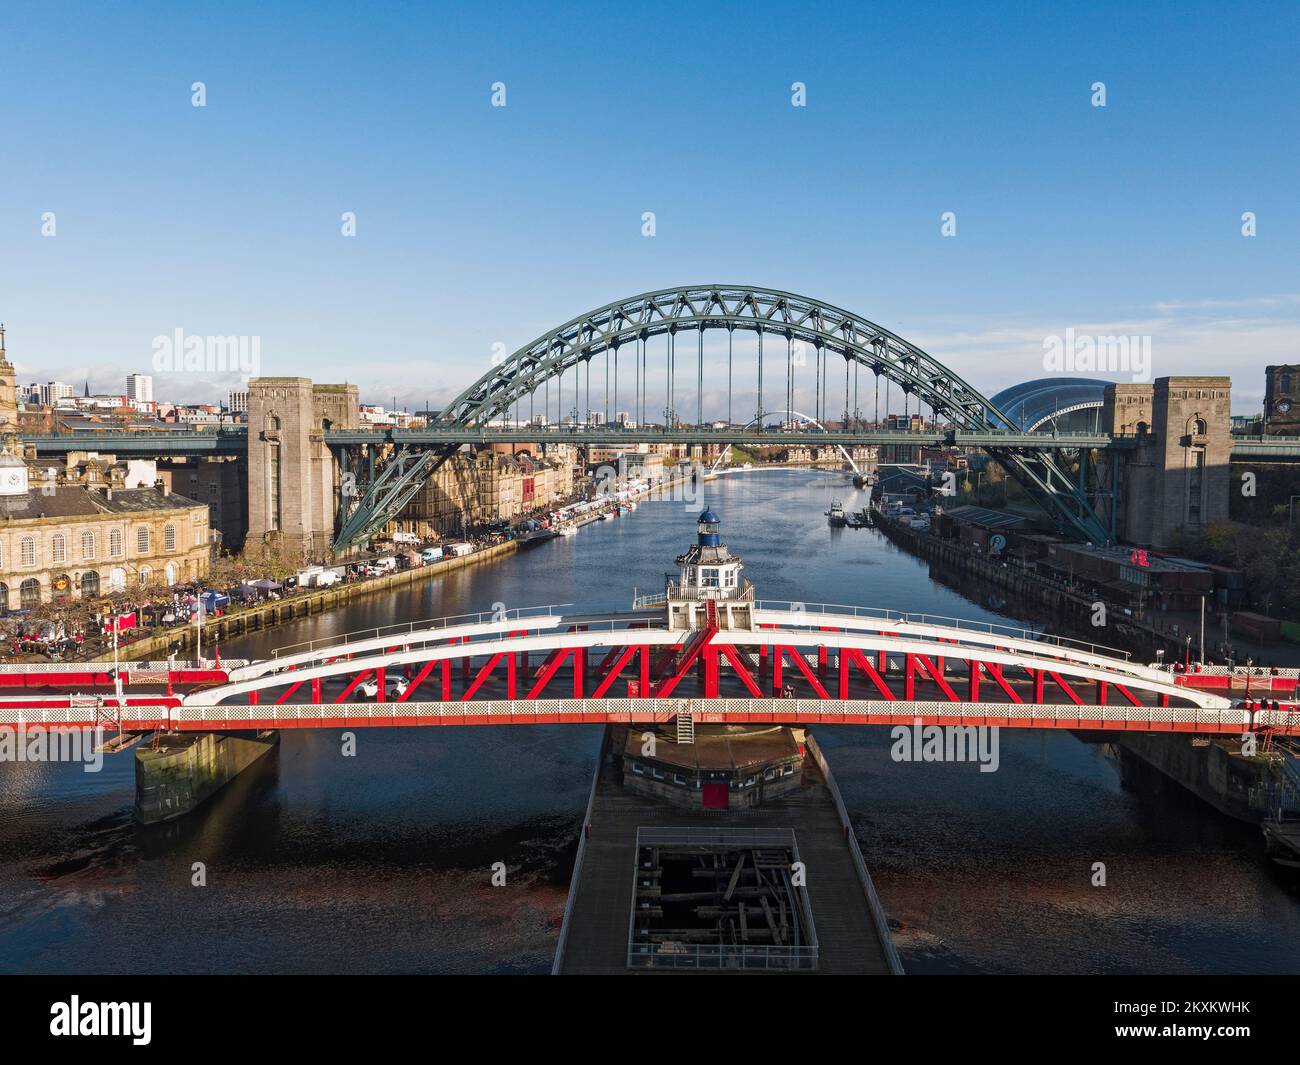 View over Newcastle upon Tyne, UK quayside with Swing and Tyne bridges, and Sunday market. Stock Photo